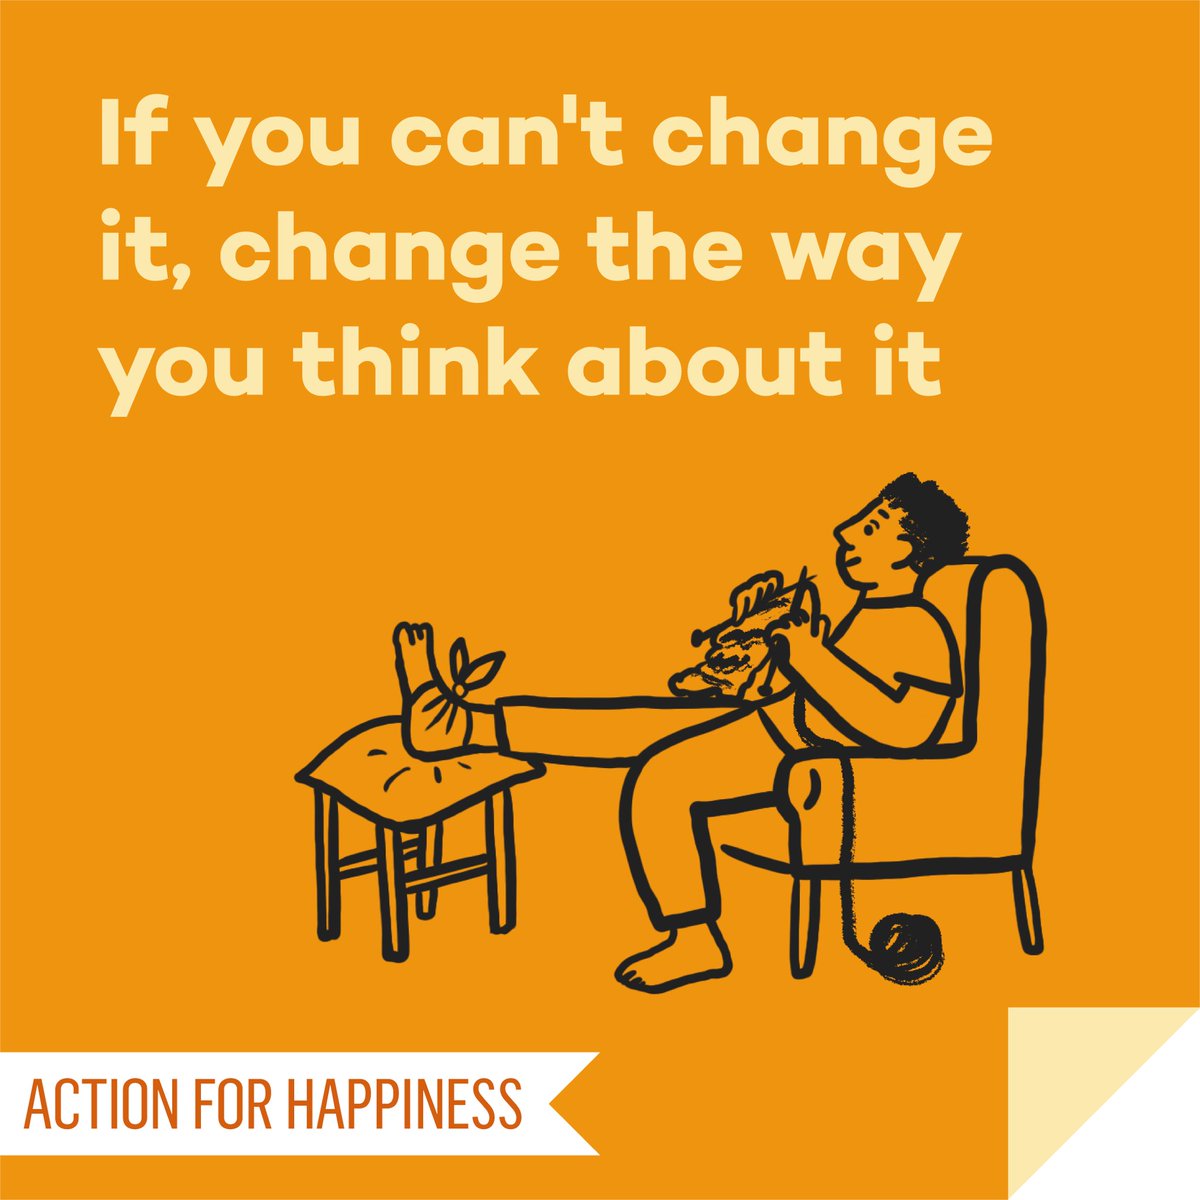 Jump Back Up July - Day 19: If you can't change it, change the way you think about it actionforhappiness.org/jump-back-up-j… #JumpBackUpJuly